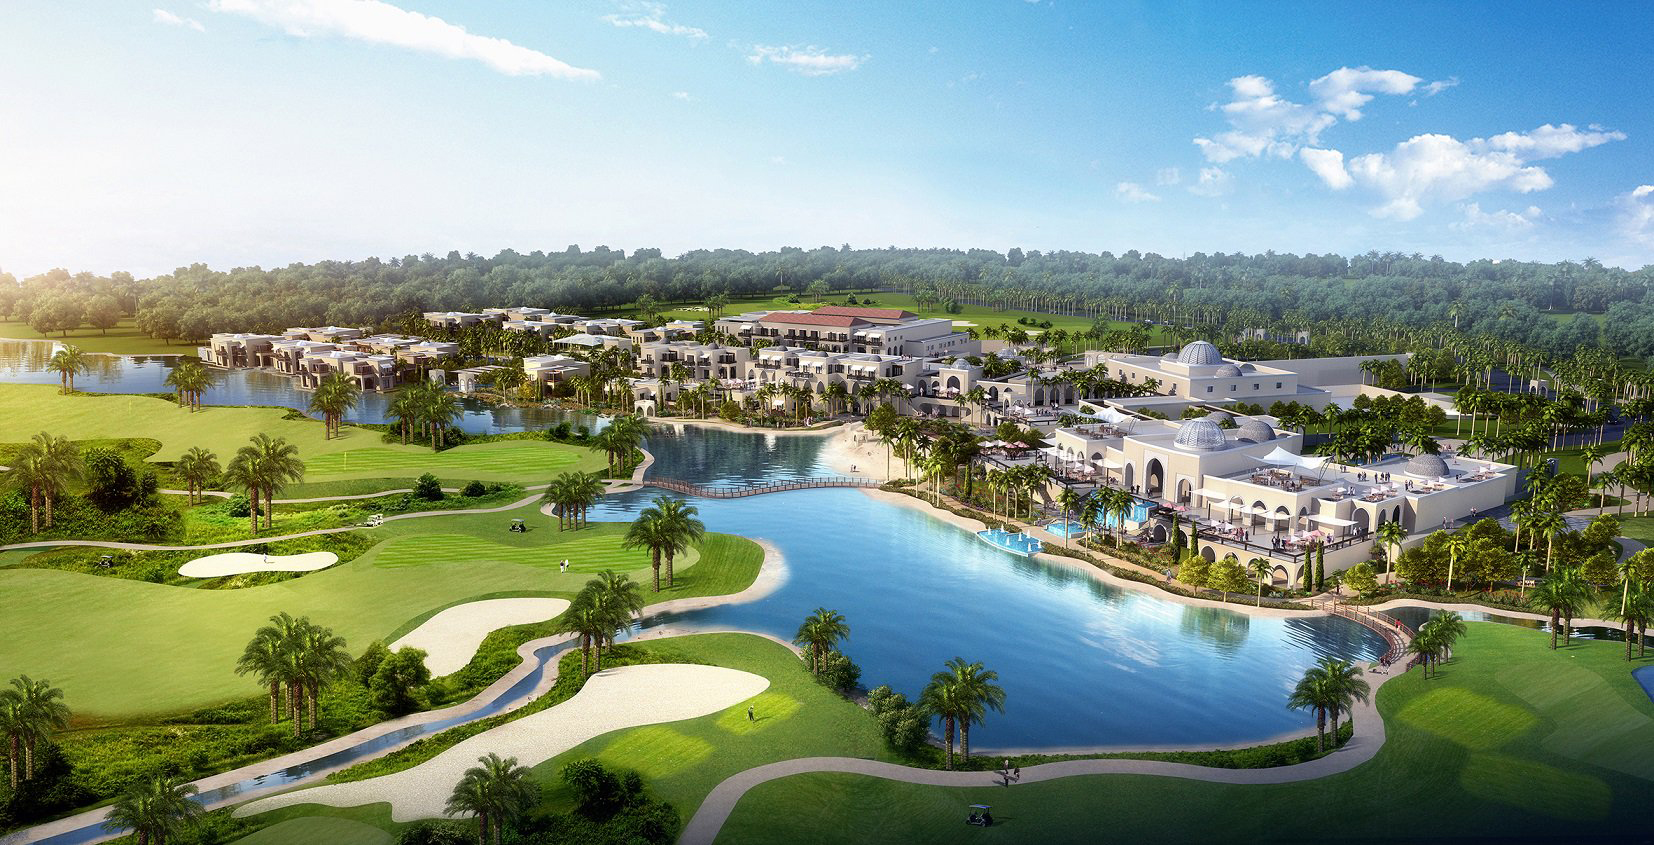 Roads & Infrastructure Works Package of the DAMAC Akoya Oxygen for “Victoria”, “Avencia”, and “Amargo” clusters